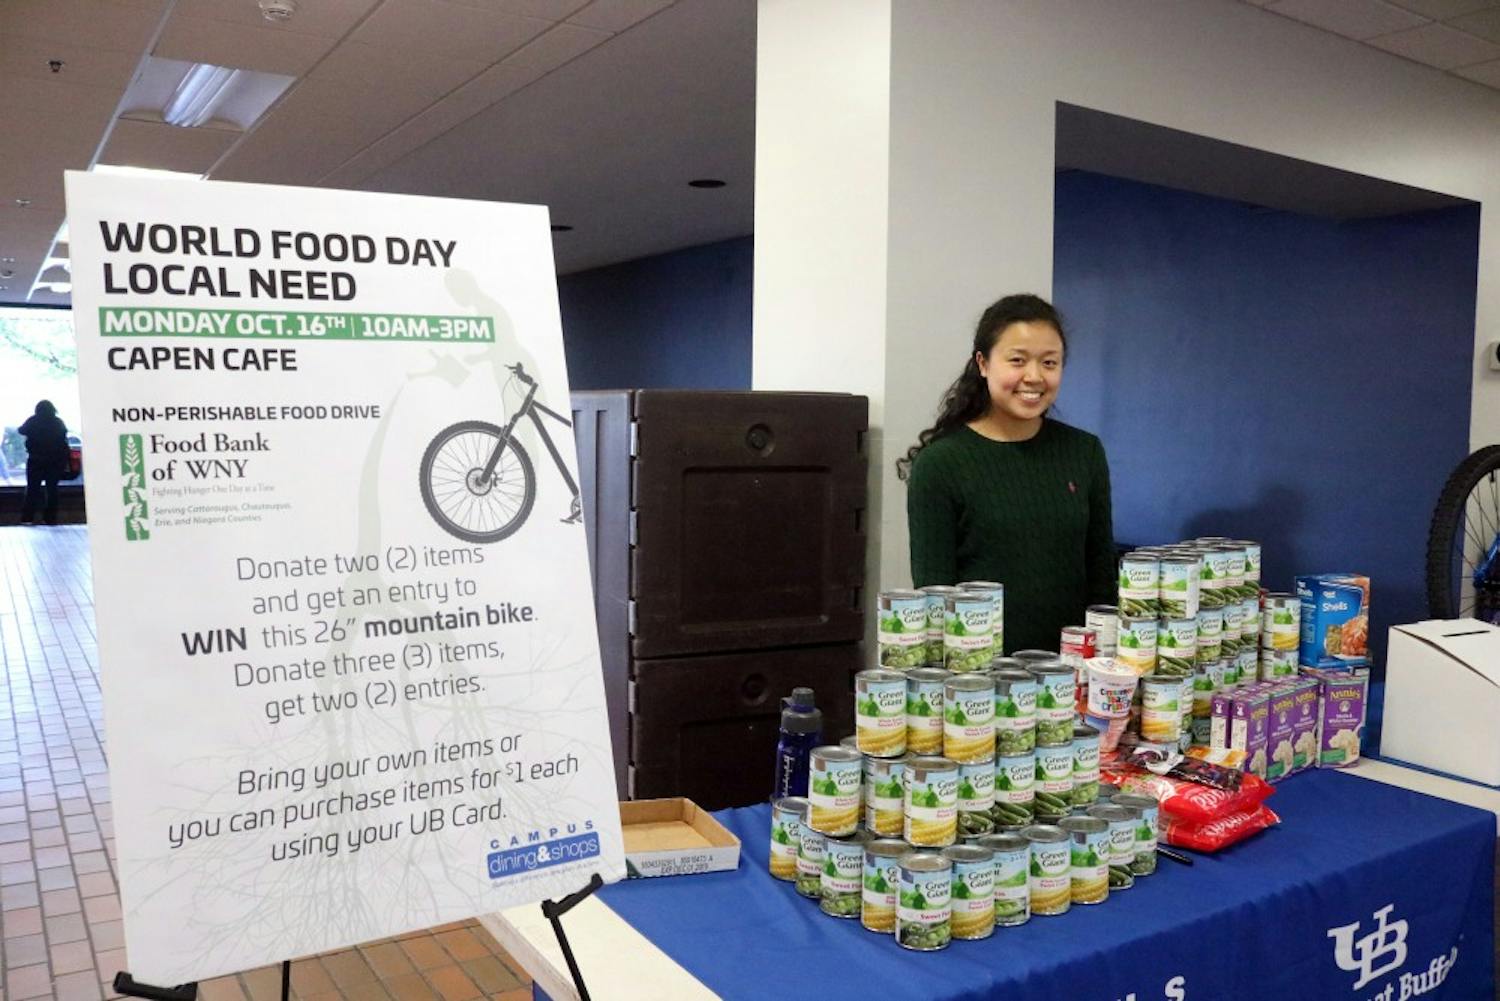 On Monday, members of the UB community gathered next to Capen Cafe to raise awareness for national hunger and sustainability. There was a food drive that will benefit the University Presbyterian Church, which supports UB students and local communities around South Campus.